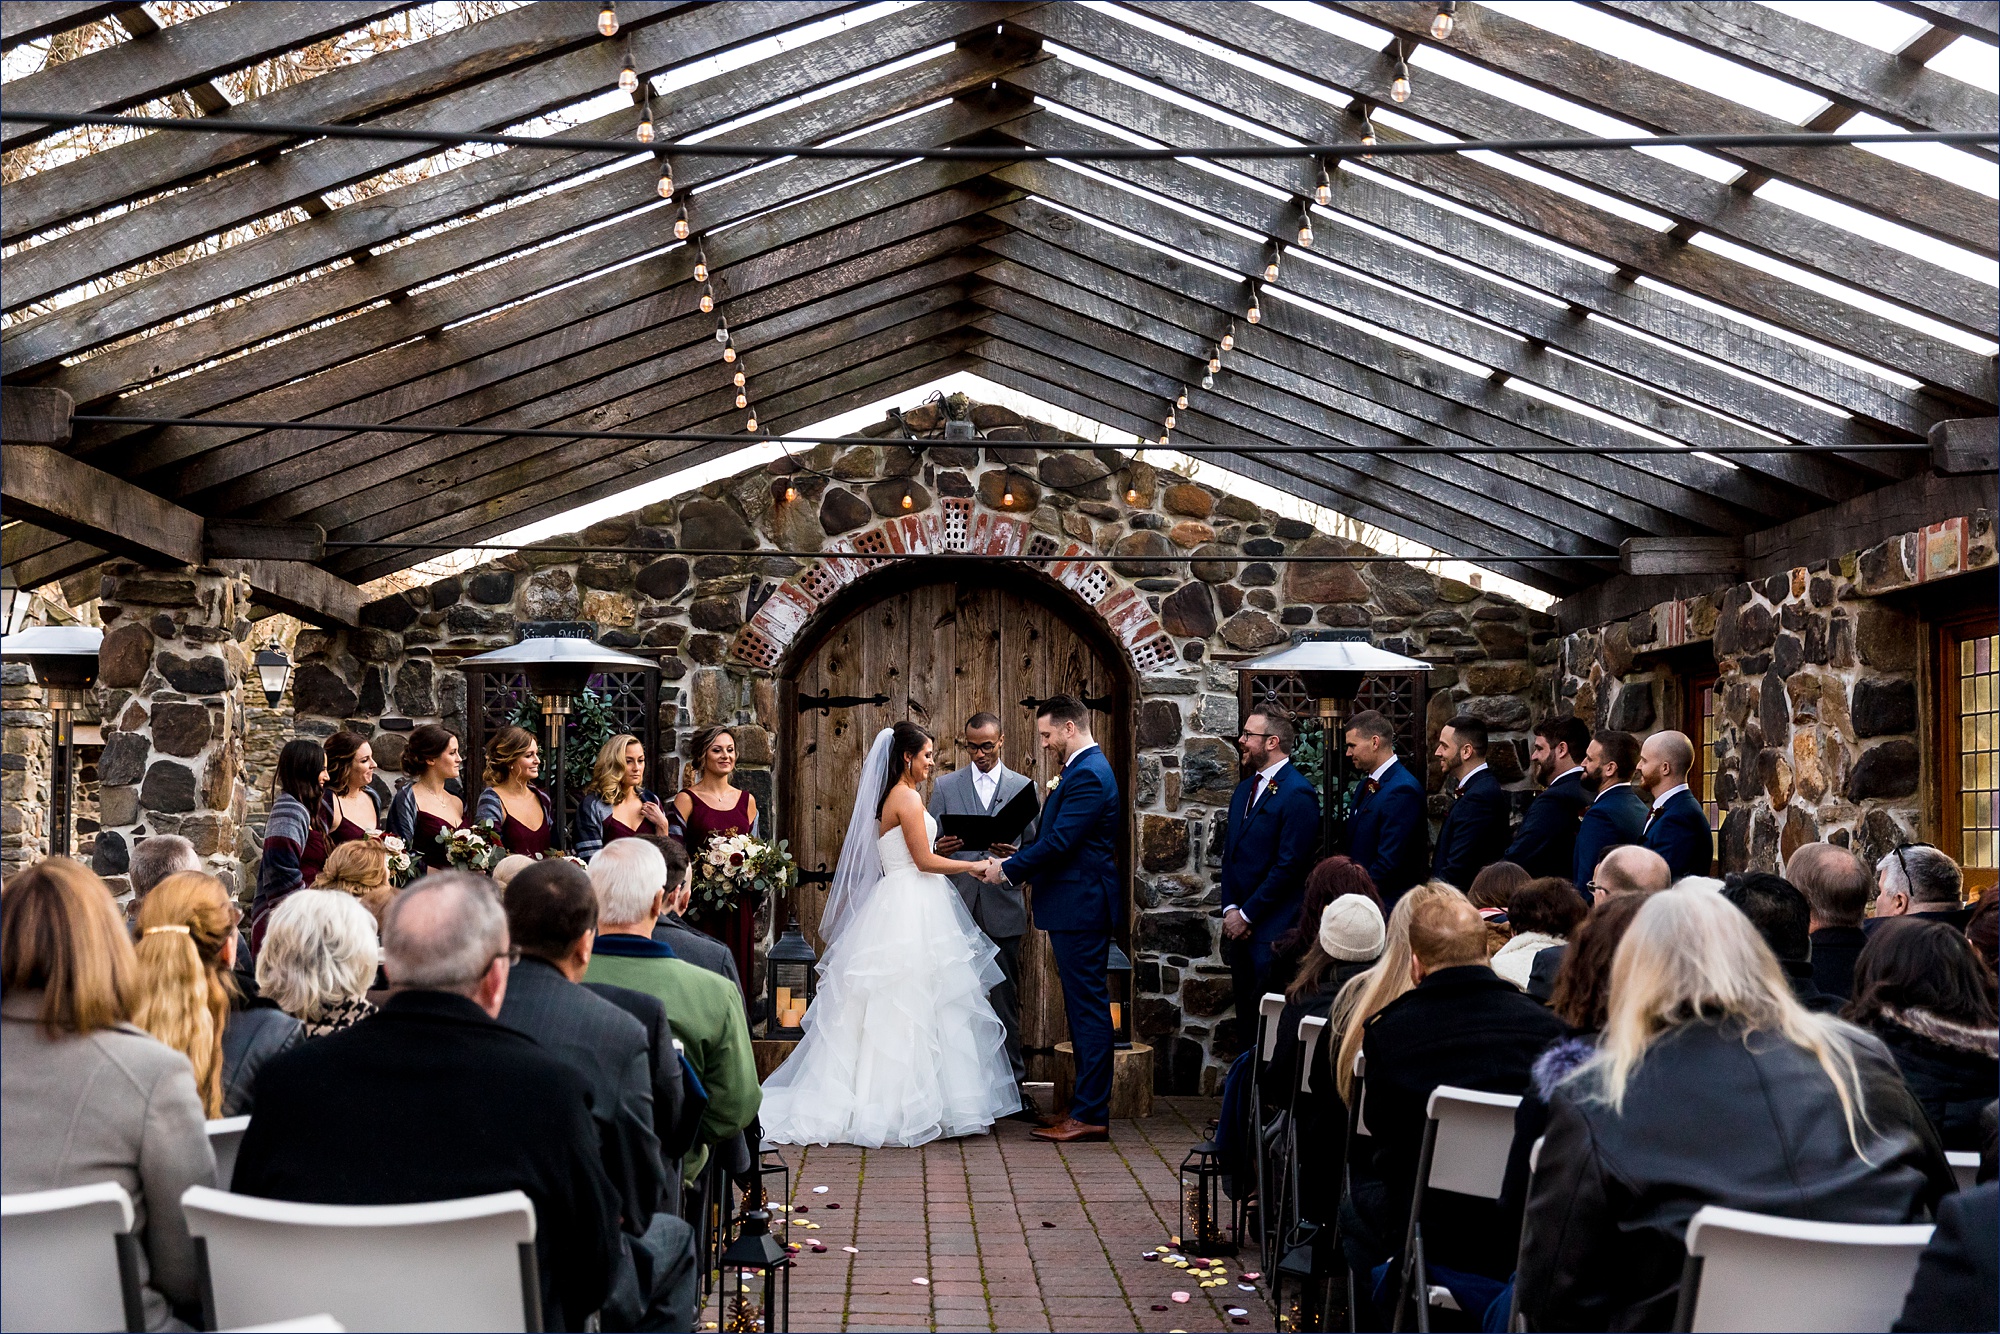 The wedding ceremony outside in February